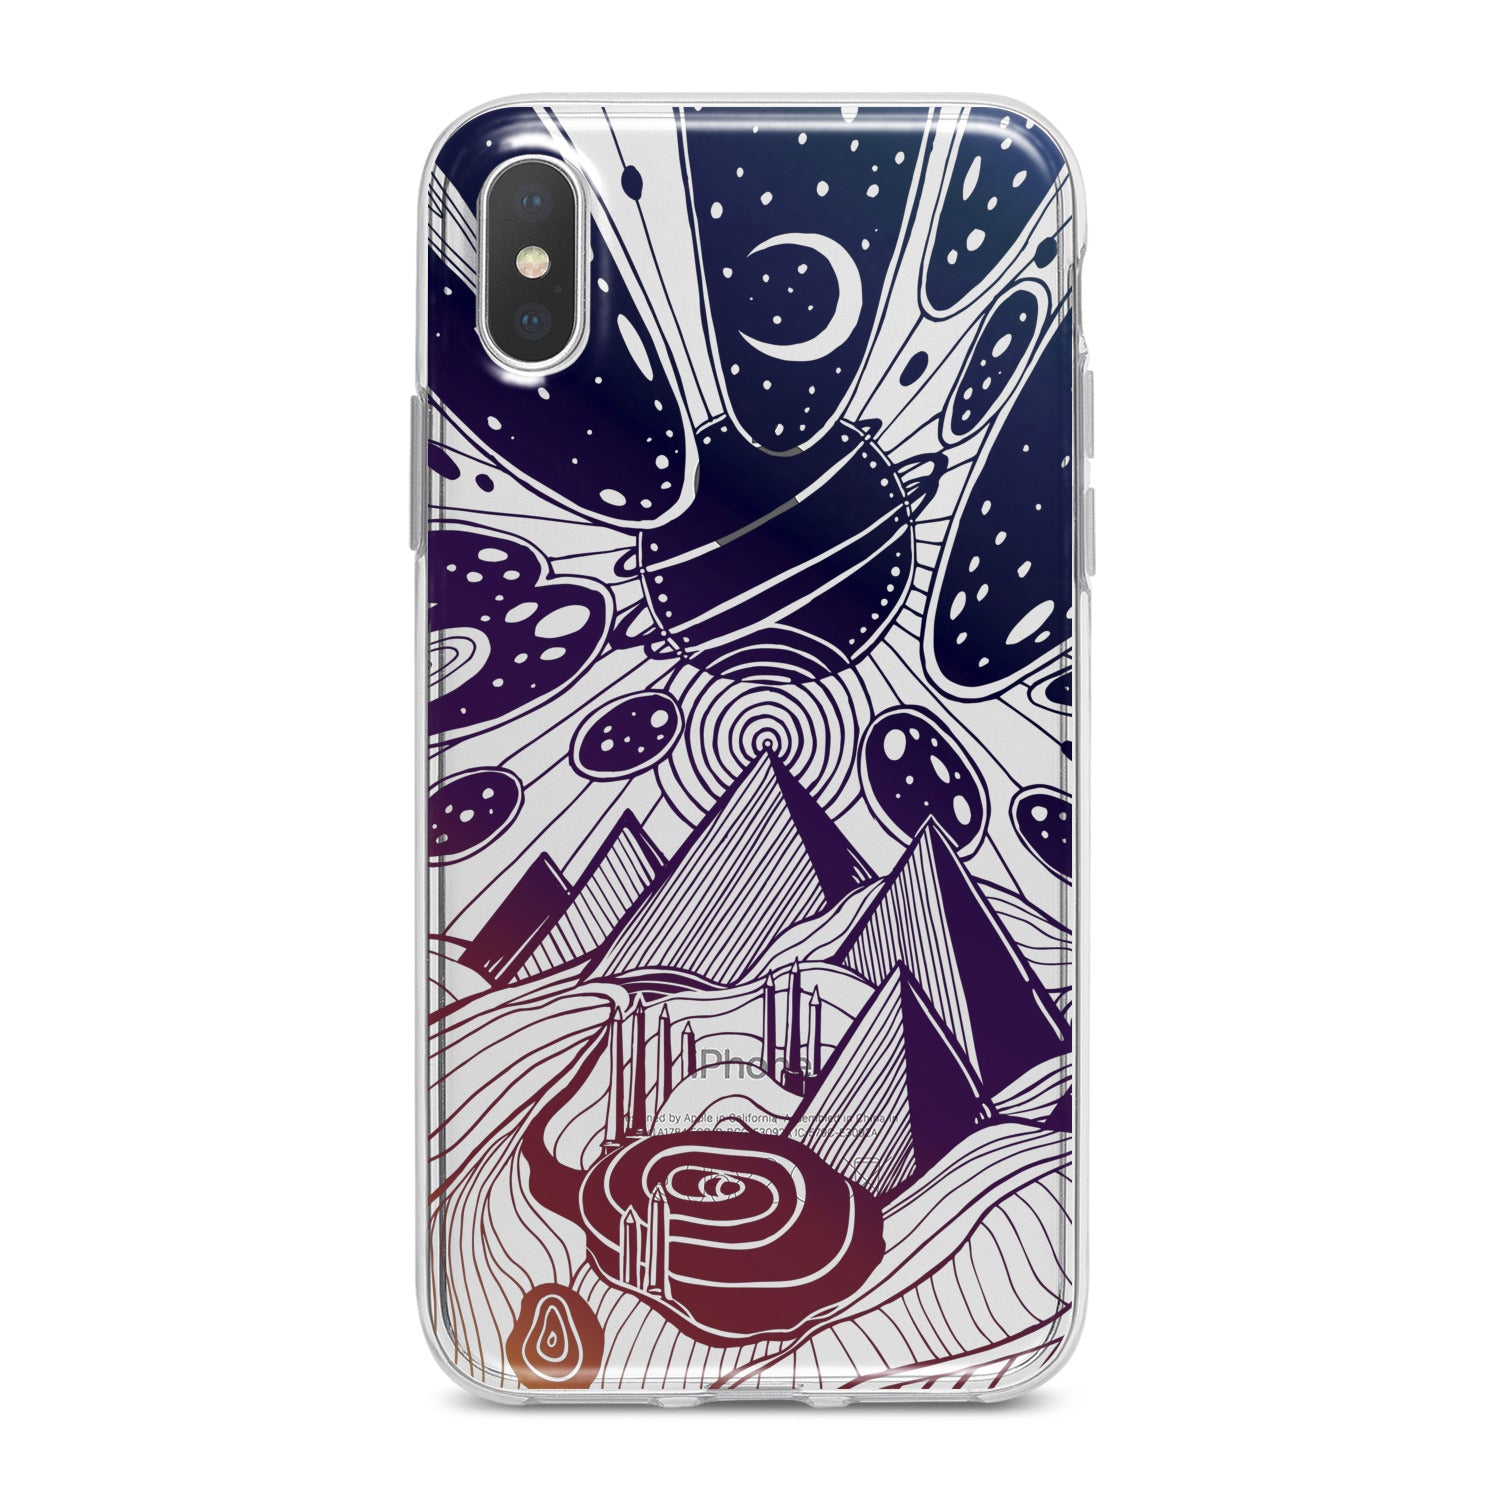 Lex Altern Giza Pyramids Phone Case for your iPhone & Android phone.